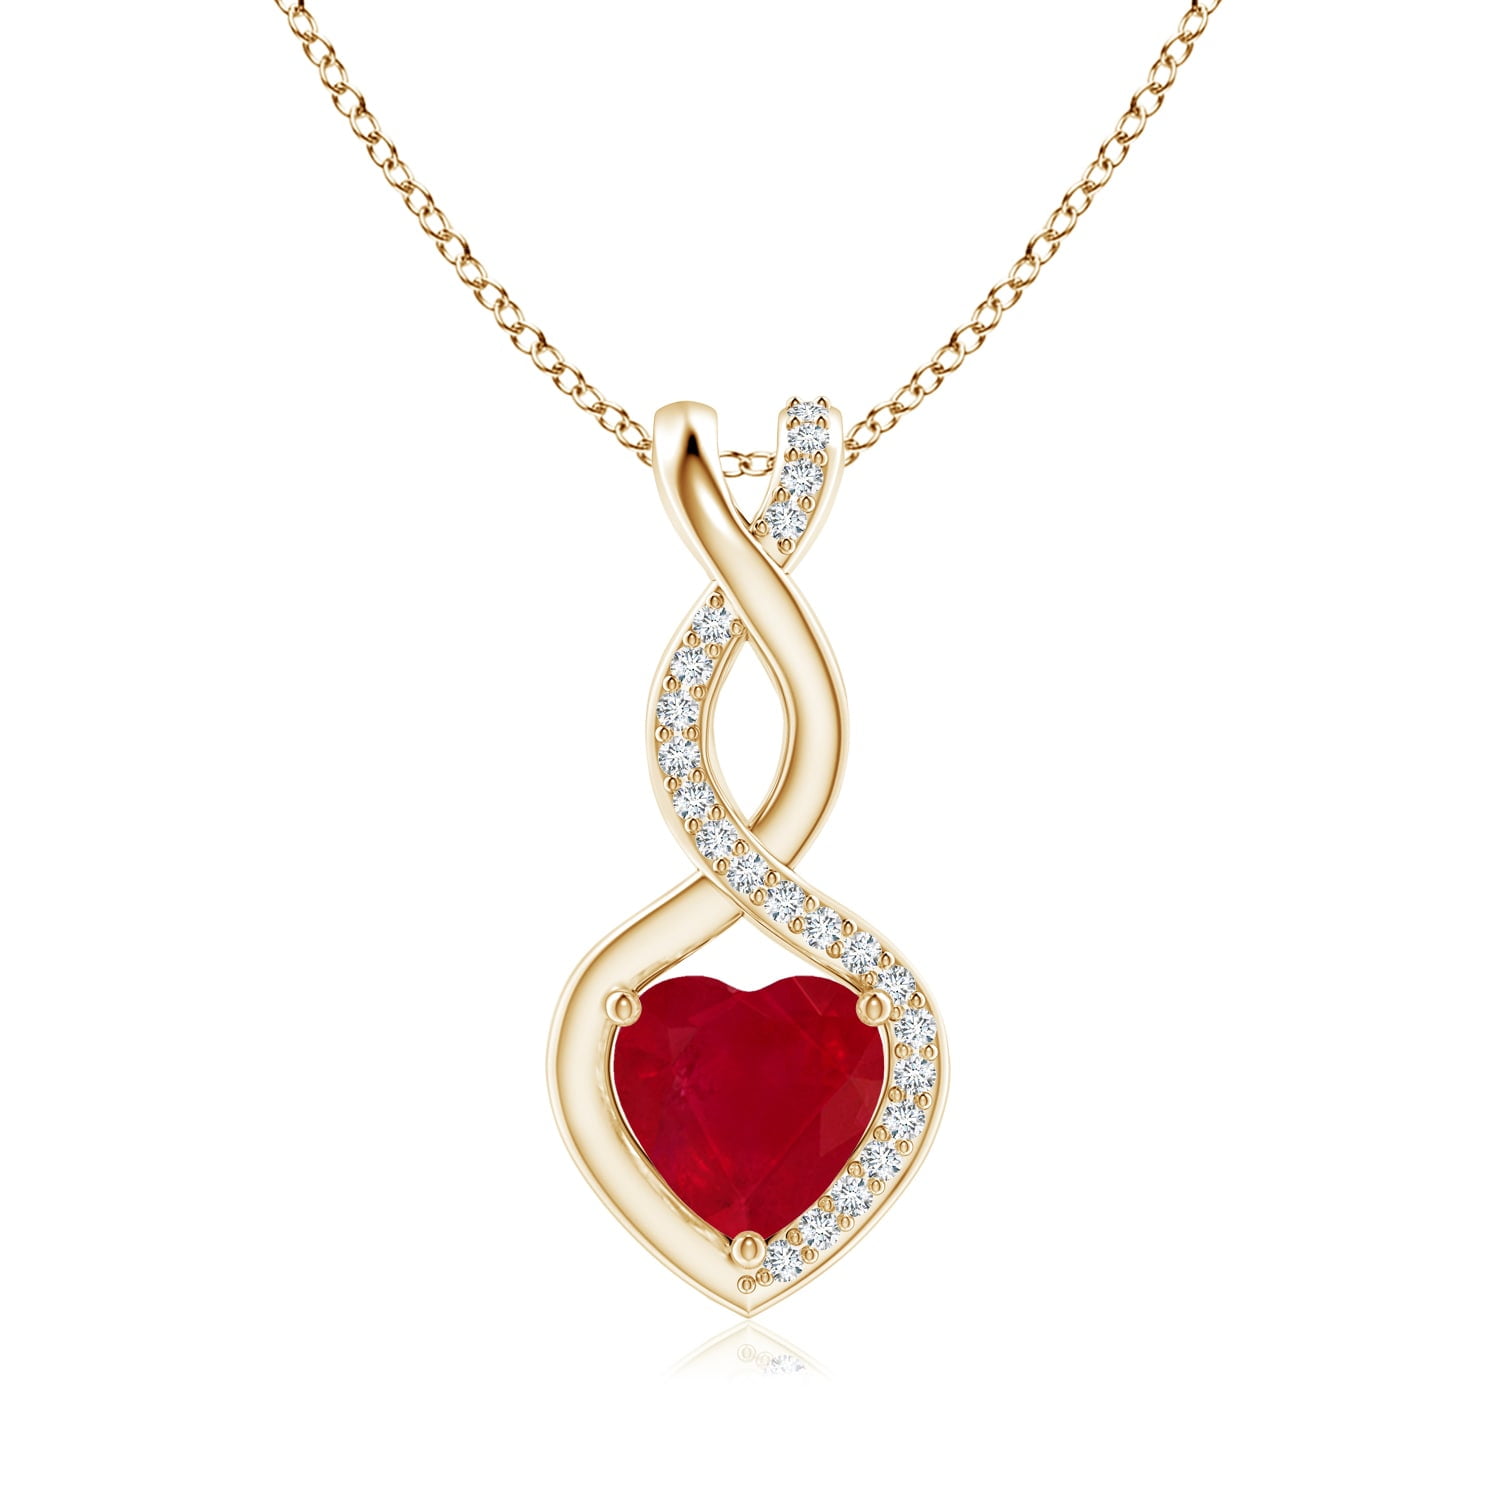 heartbeat necklace images